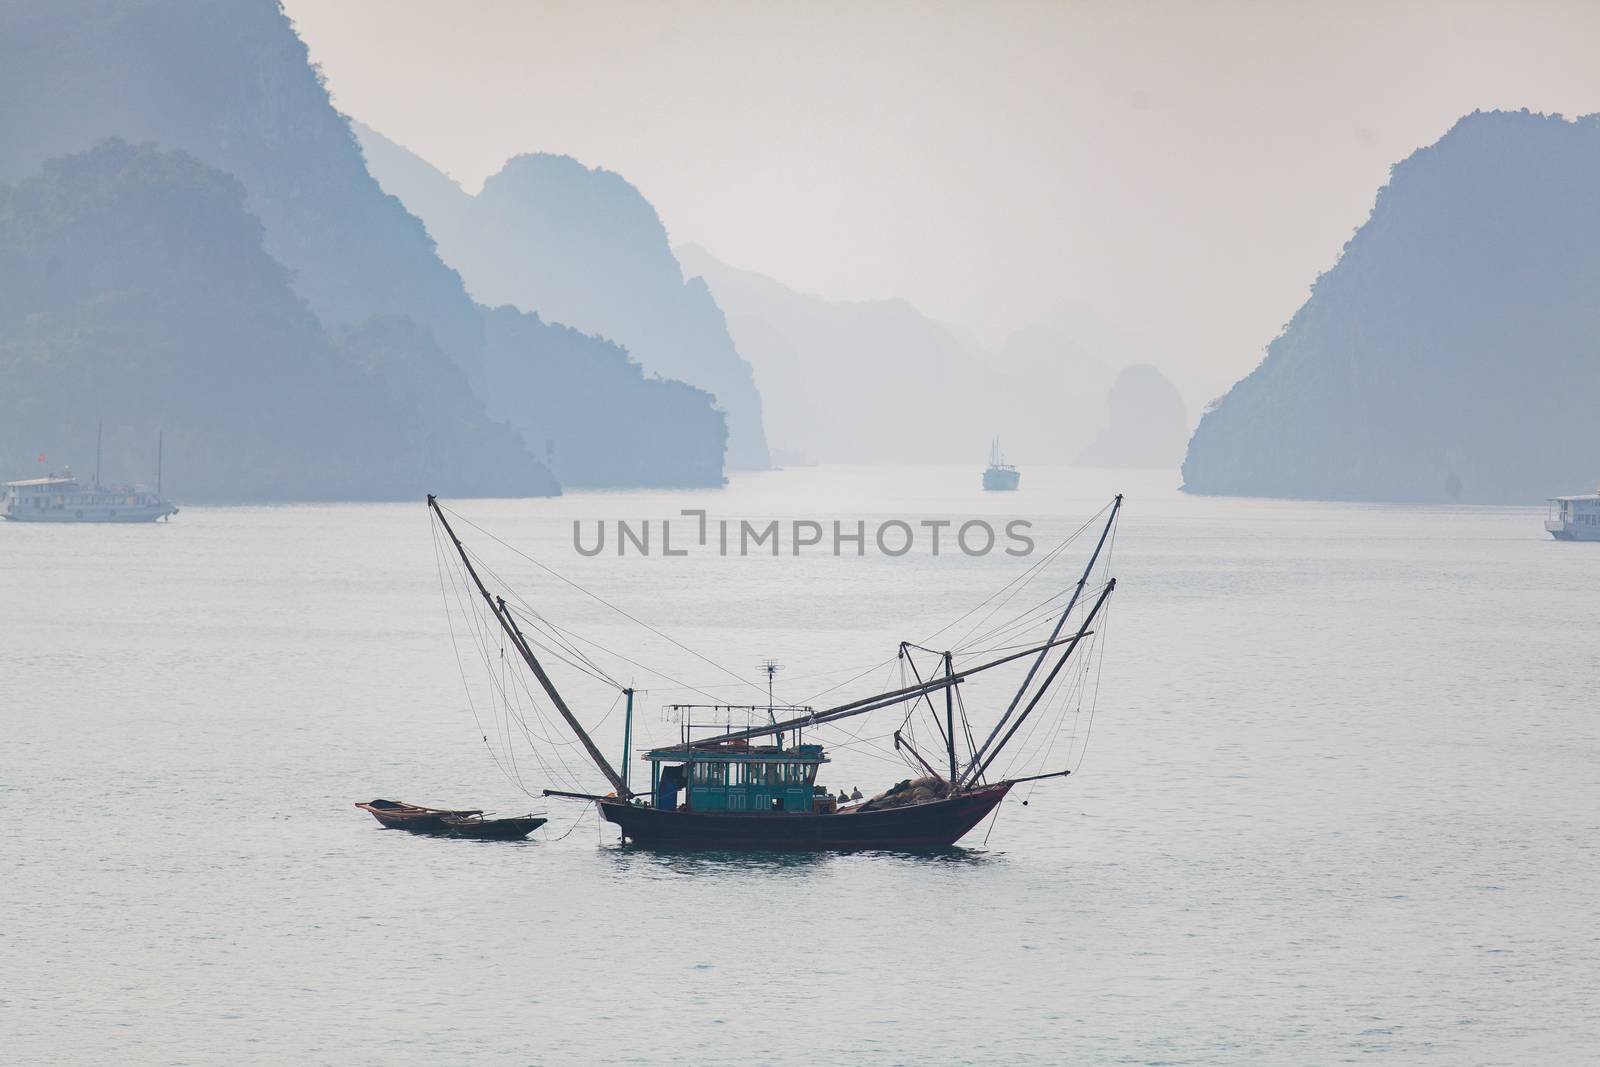 Ha Long Bay, Vietnam, is a World Heritage Site and very popular with tourists. Thousands of towering limestone islands topped by rainforests rising up out of the emerald seas. Cruise ships take tourists for day trips and overnight stays in the bay. Traditional fishing boats against blue mountains, . High quality photo